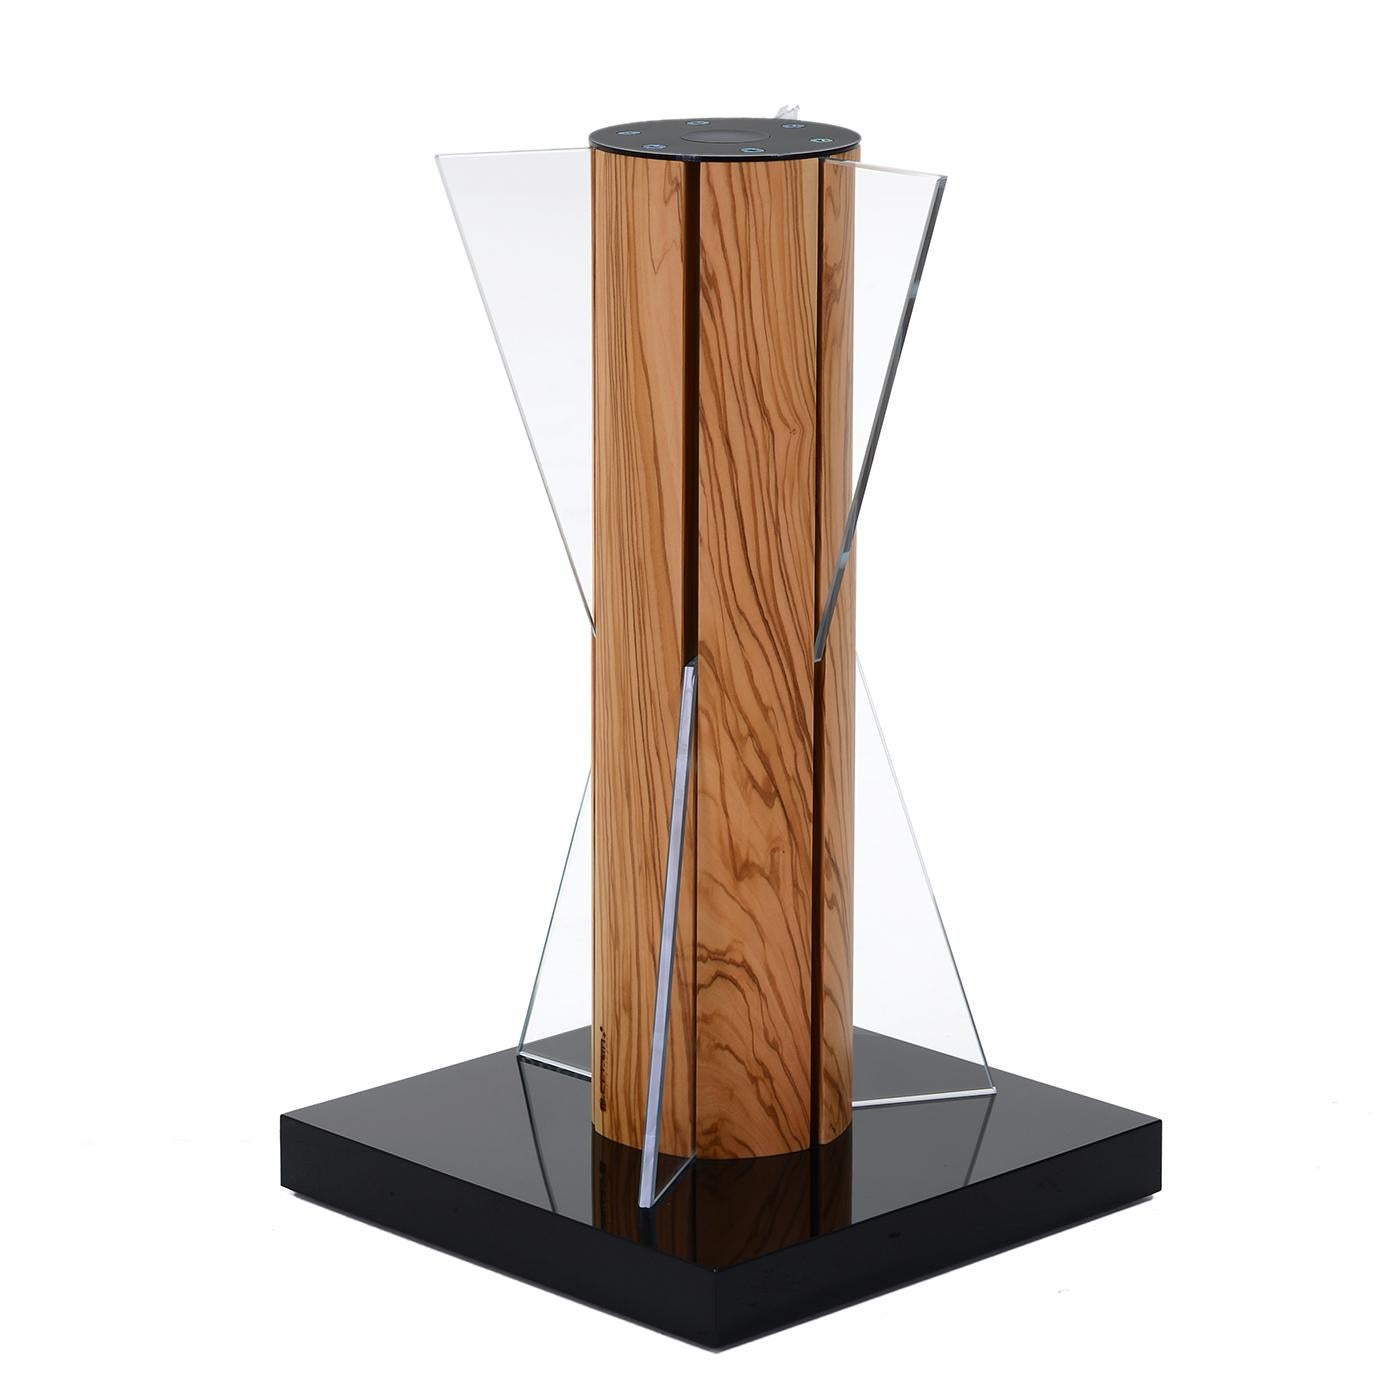 The silhouette of this extremely modern table lamp evokes an hourglass, the ancient, absolute symbol of time that has been into integrated into an olive tree, the symbol of the centuries. This item is part of the company's Carpentry collection. Made